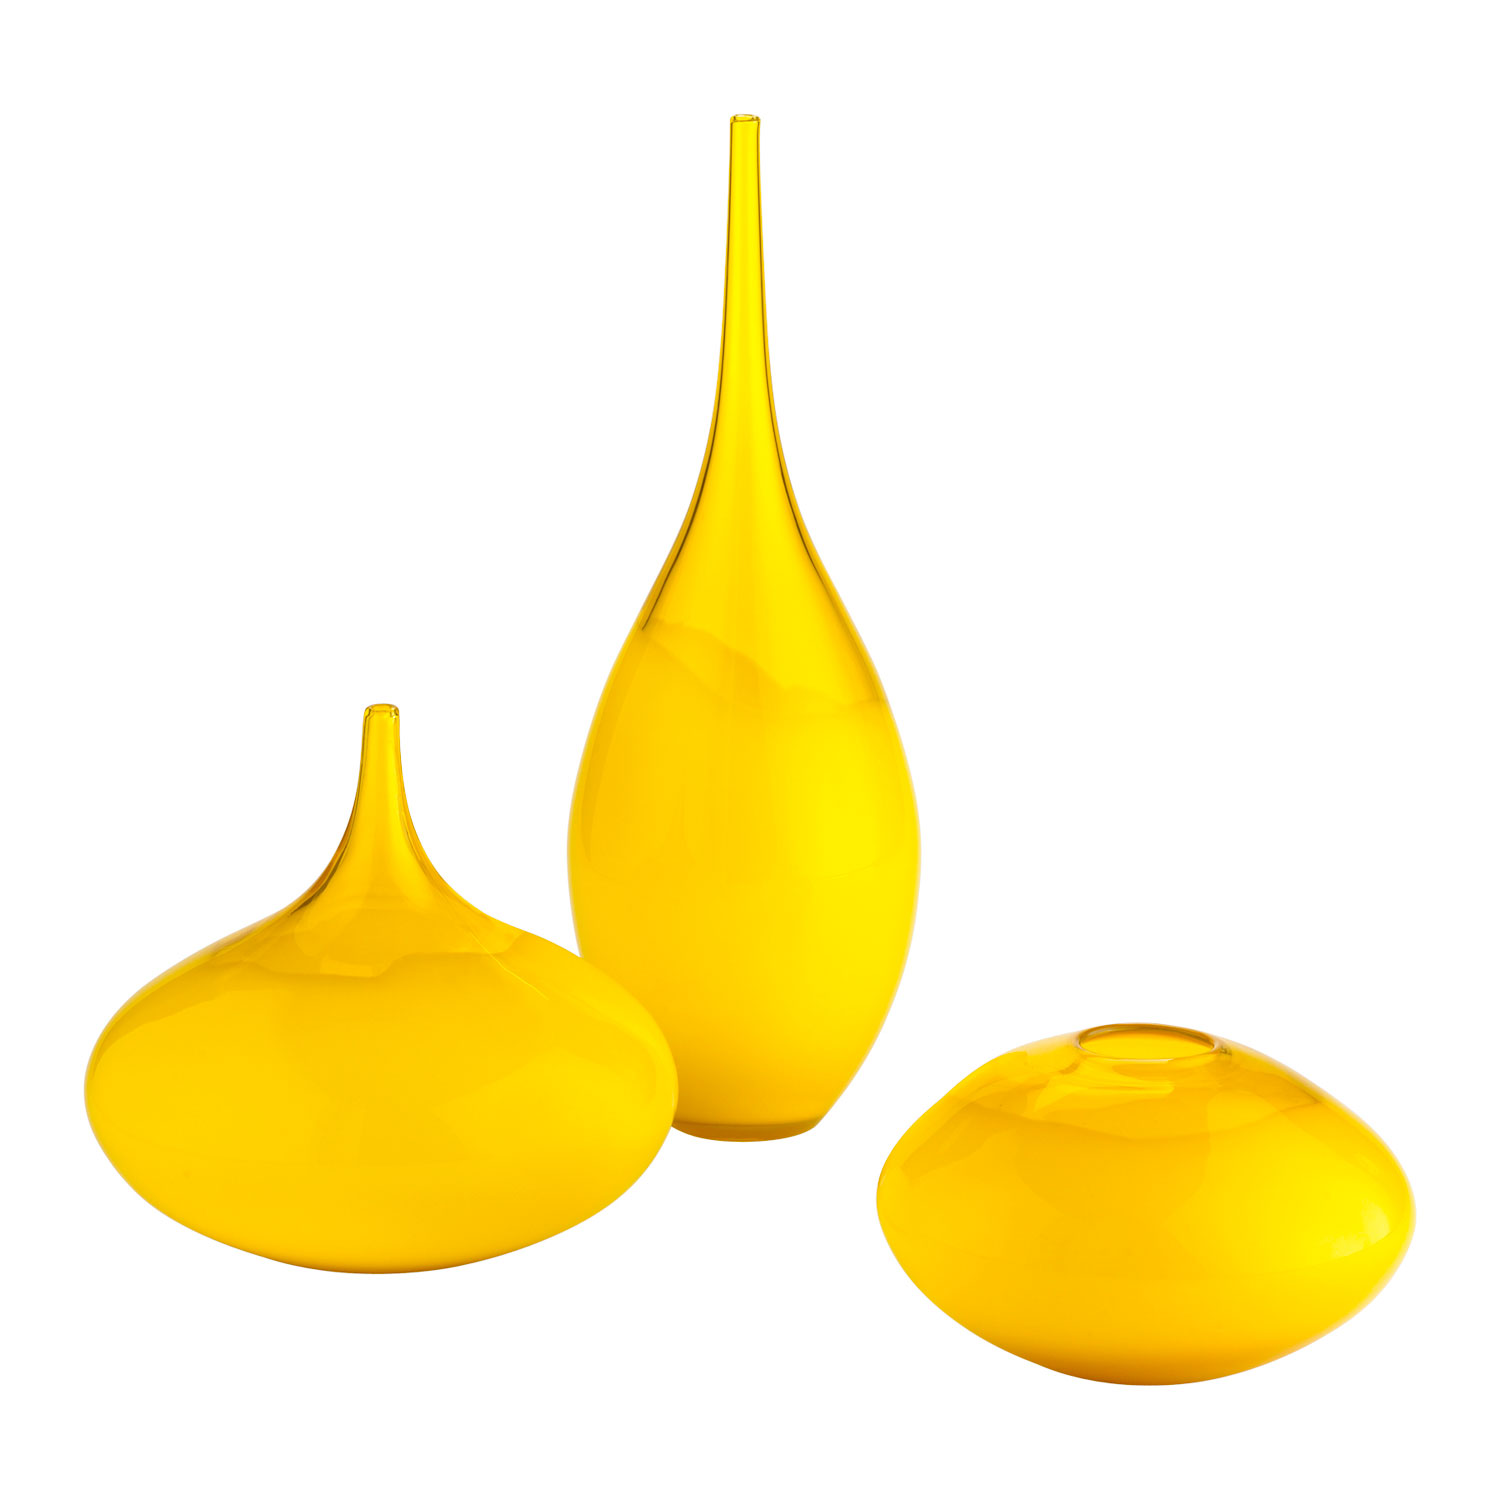 Vases Category